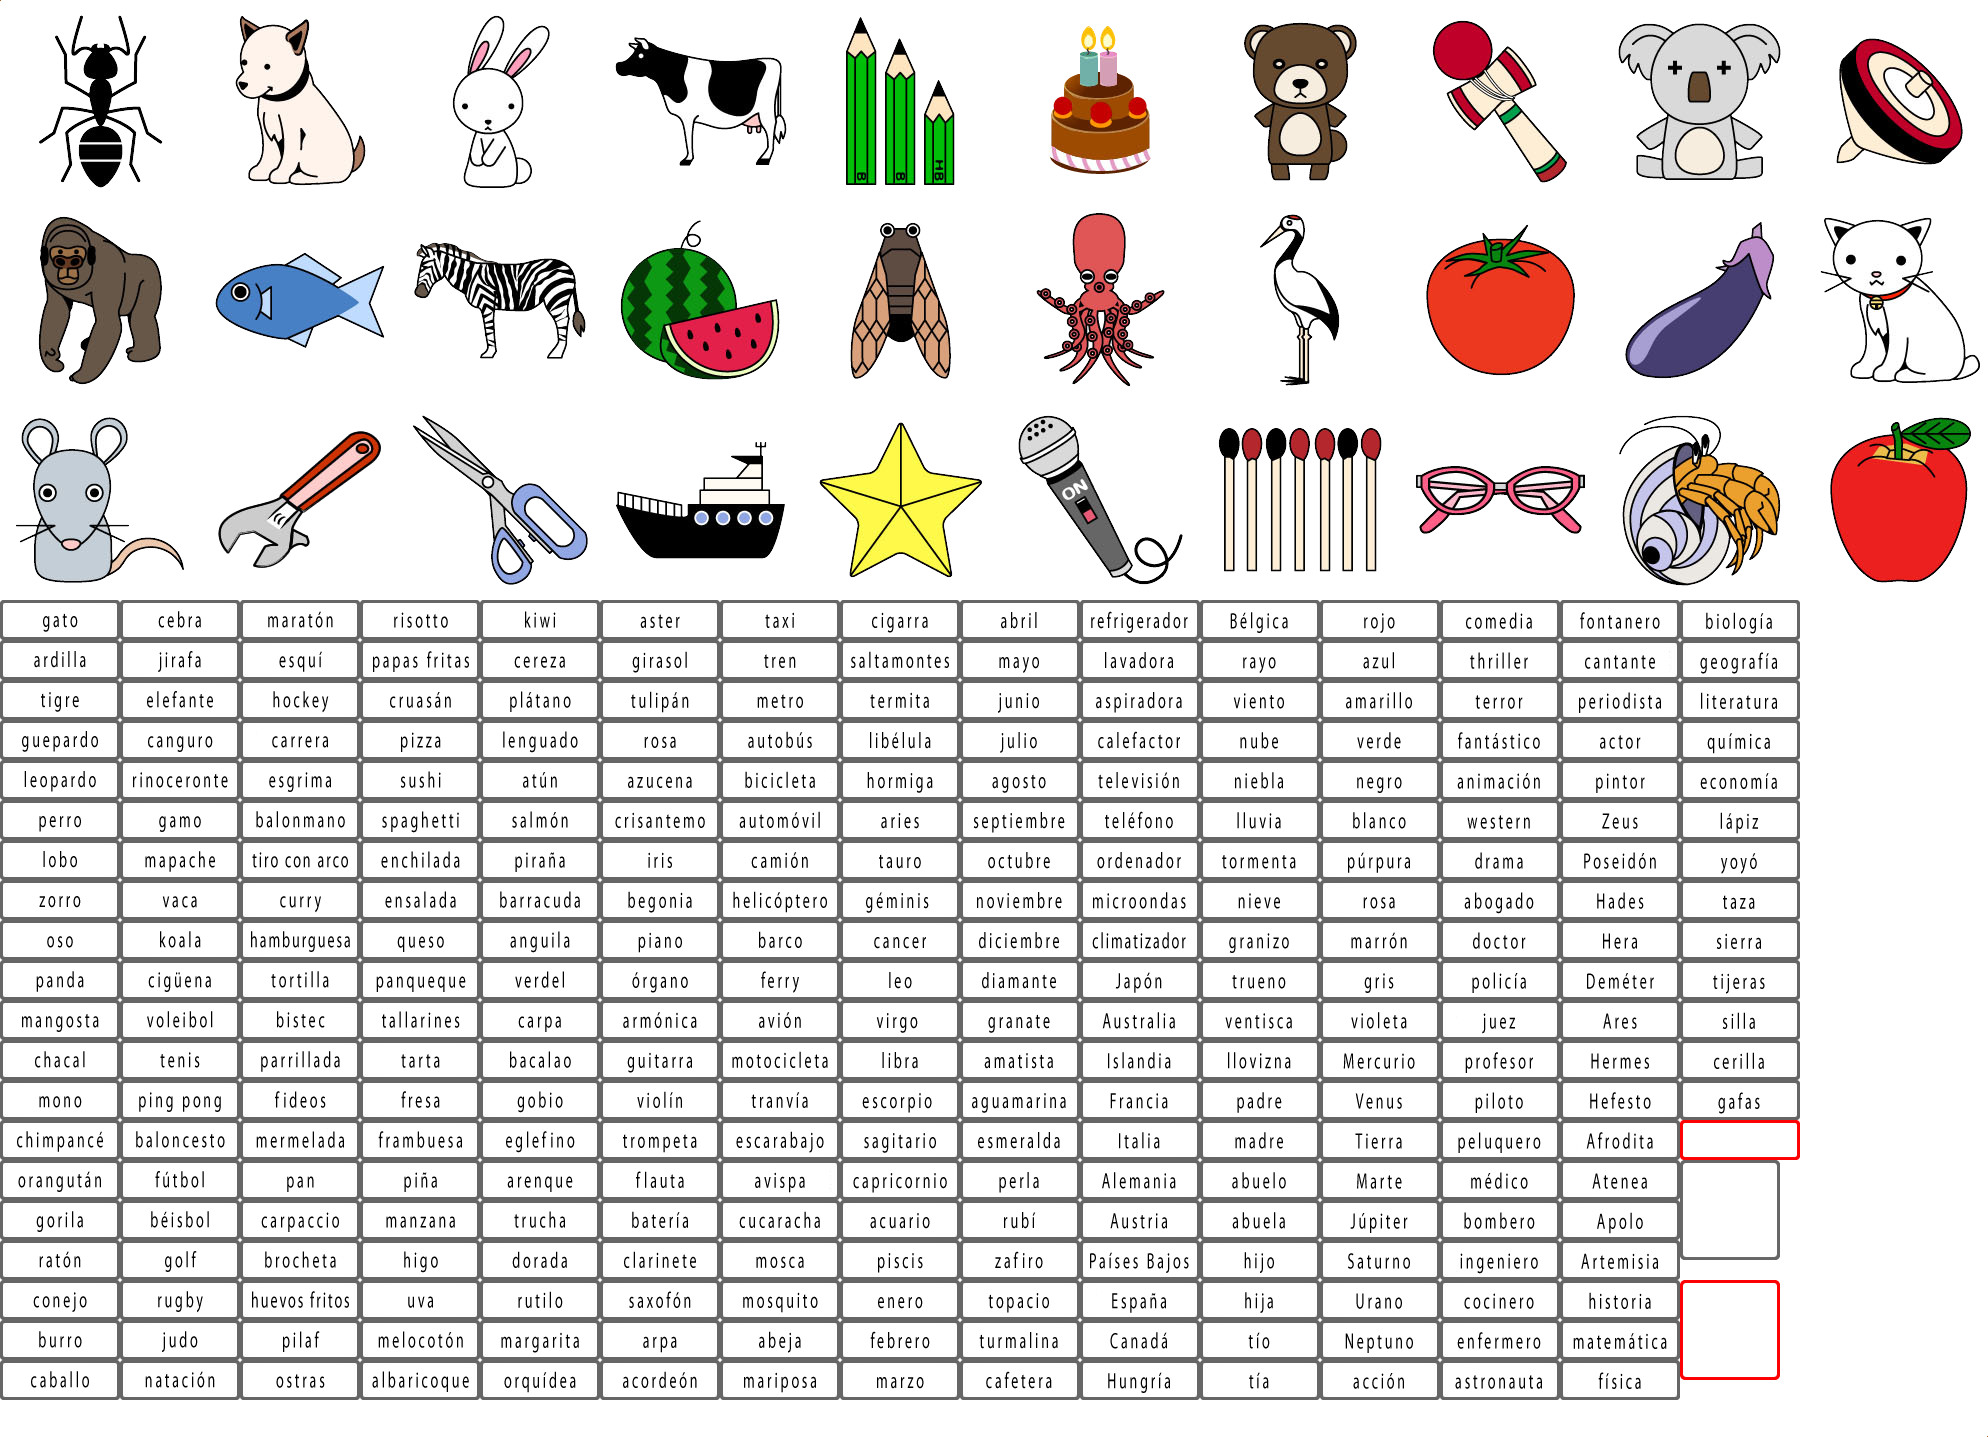 Objects (Category S)